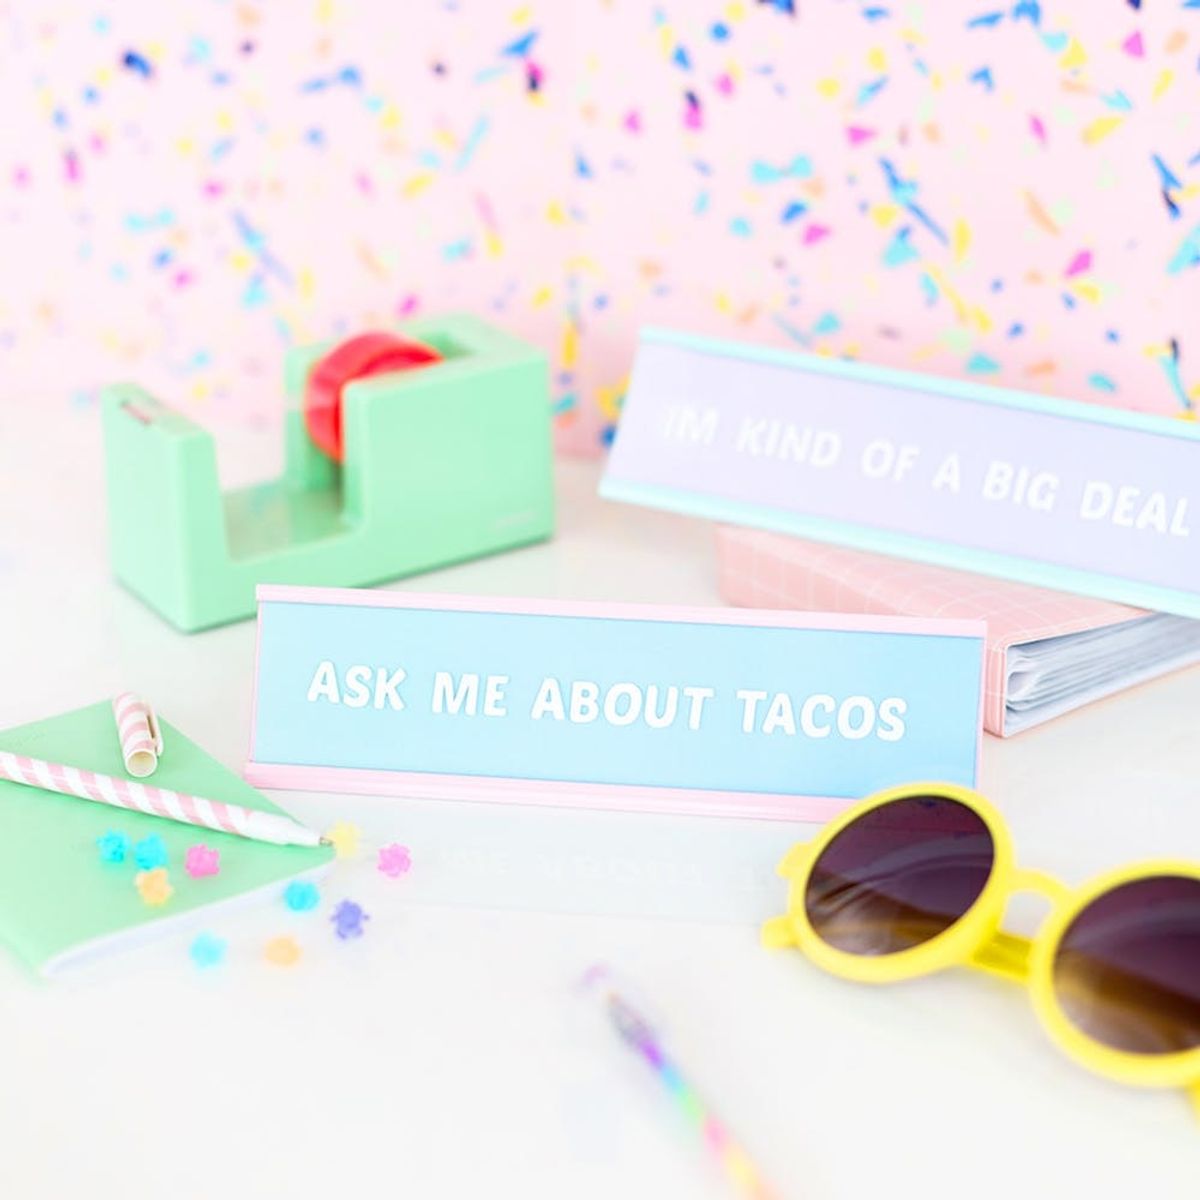 Desk Nameplates, Disco Ball Vases, and More Stylish Weekend Crafts